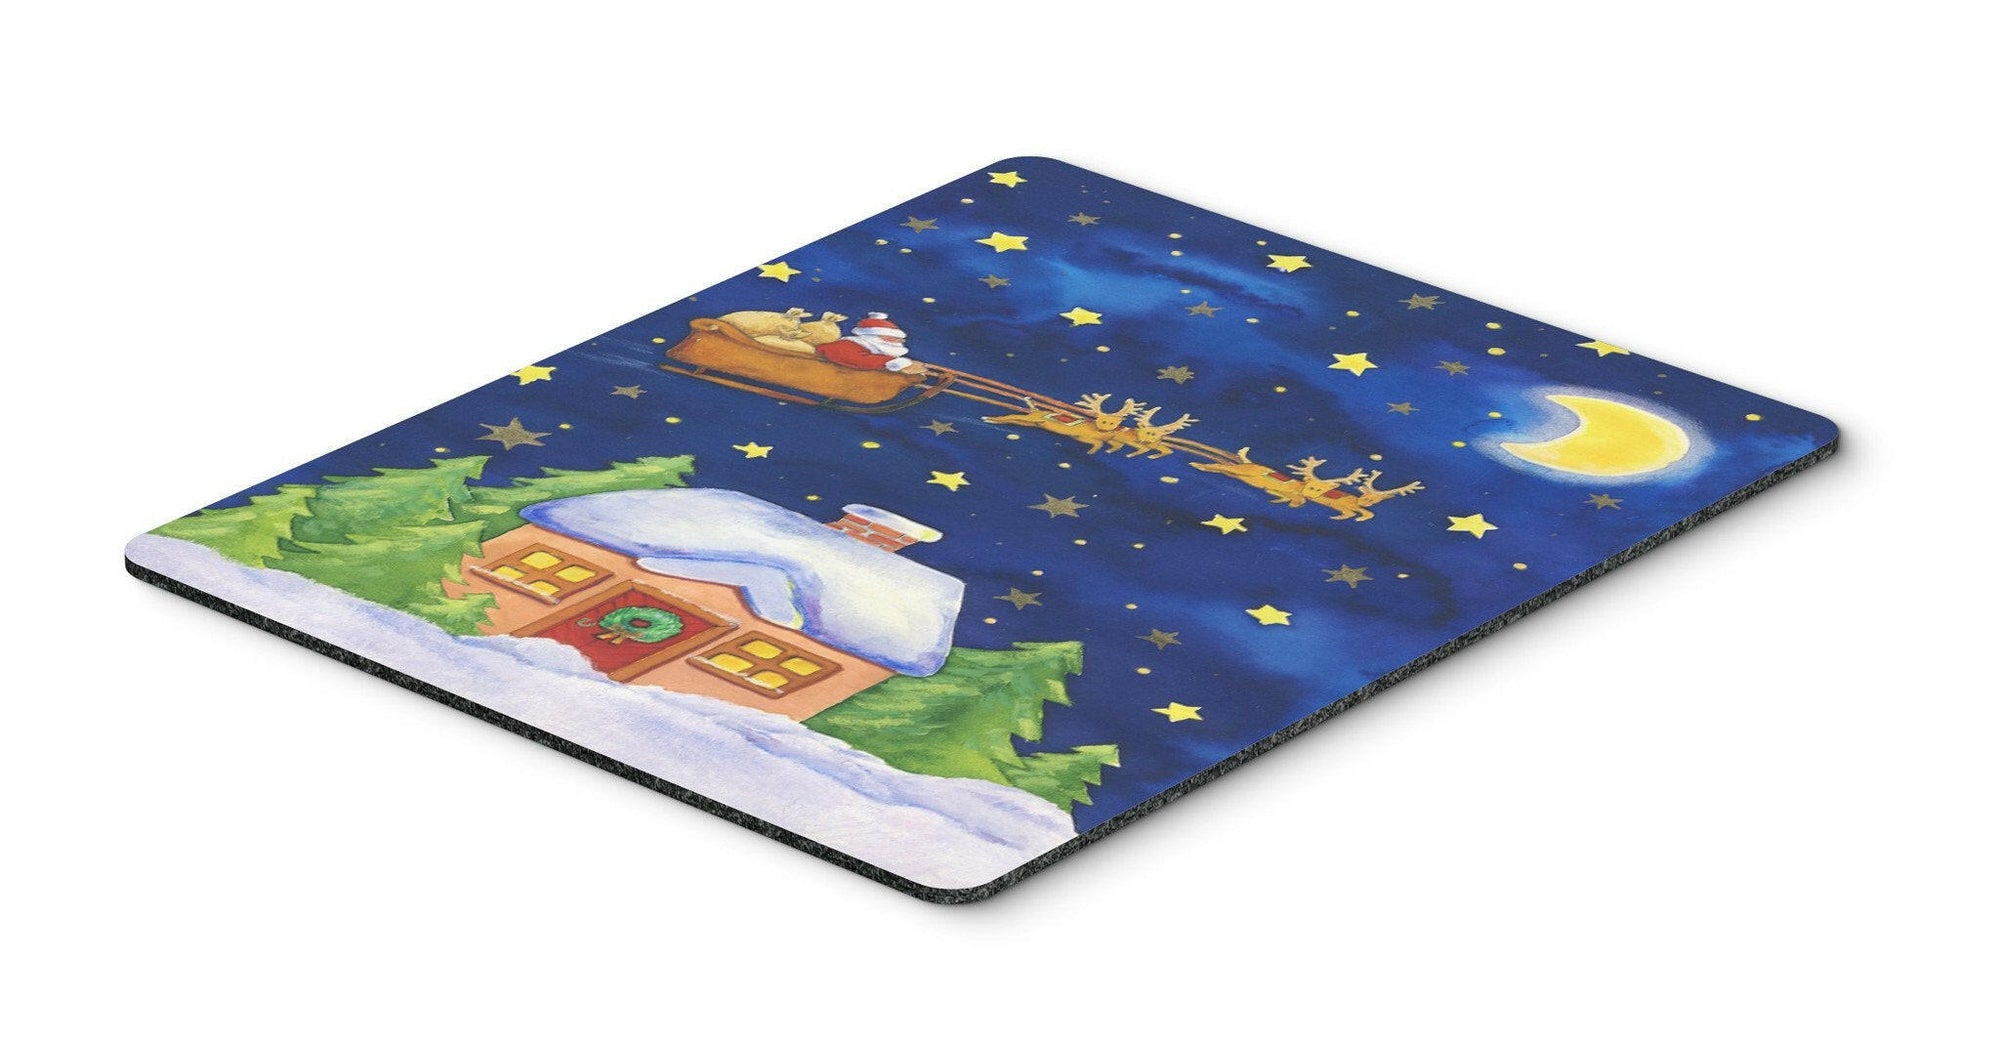 Christmas Santa Claus Across the Sky Mouse Pad, Hot Pad or Trivet APH5898MP by Caroline's Treasures